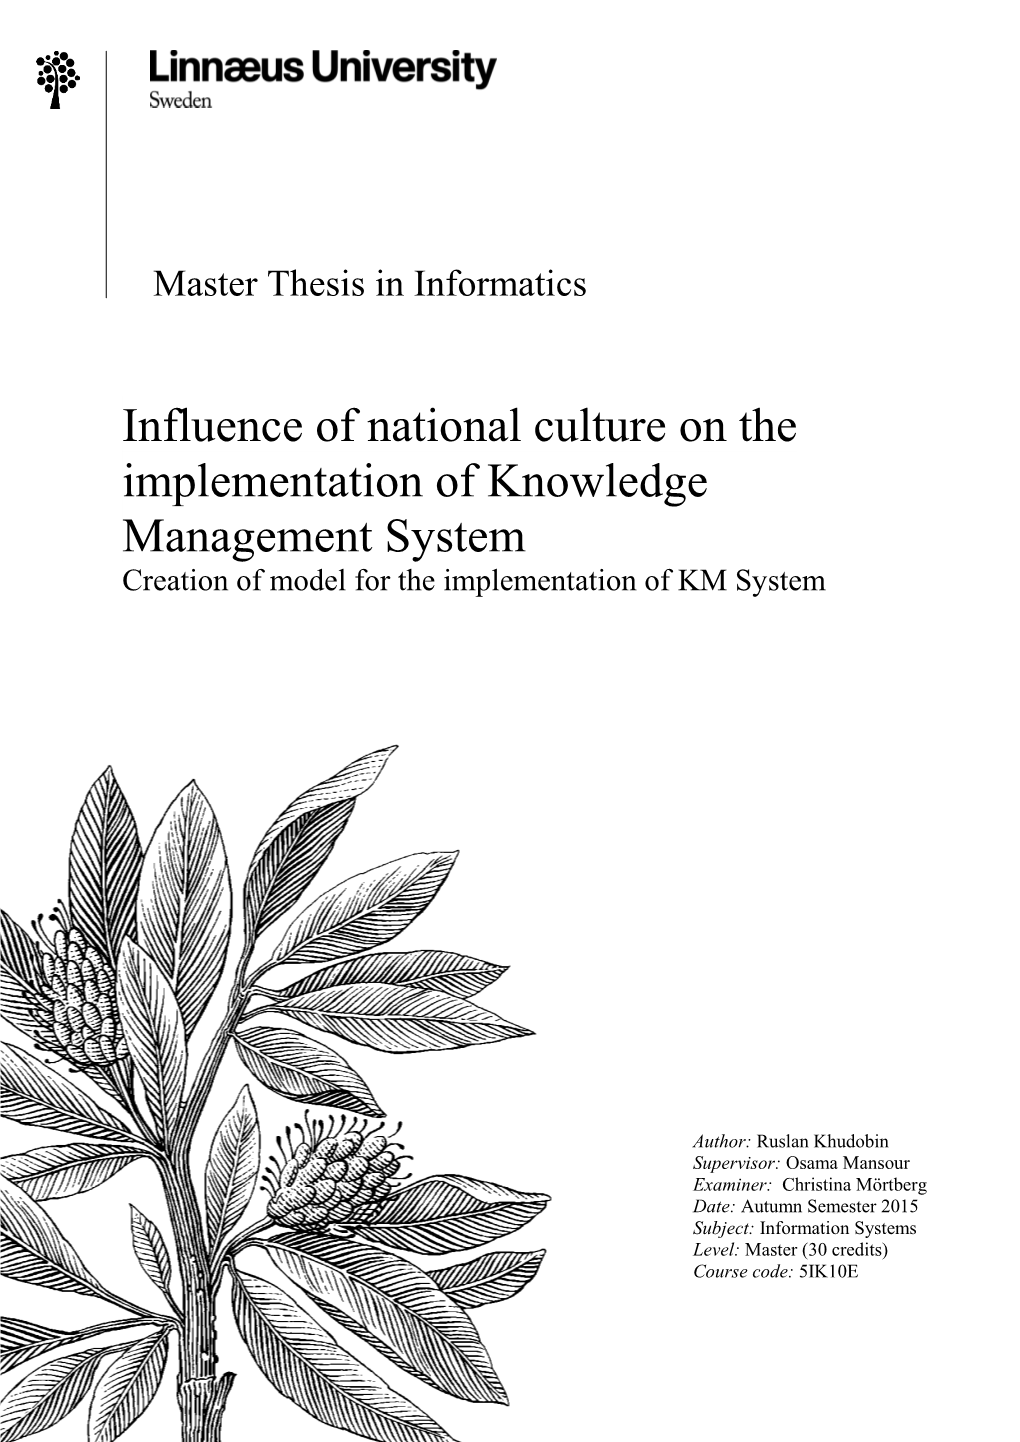 Influence of National Culture on the Implementation of Knowledge Management System Creation of Model for the Implementation of KM System